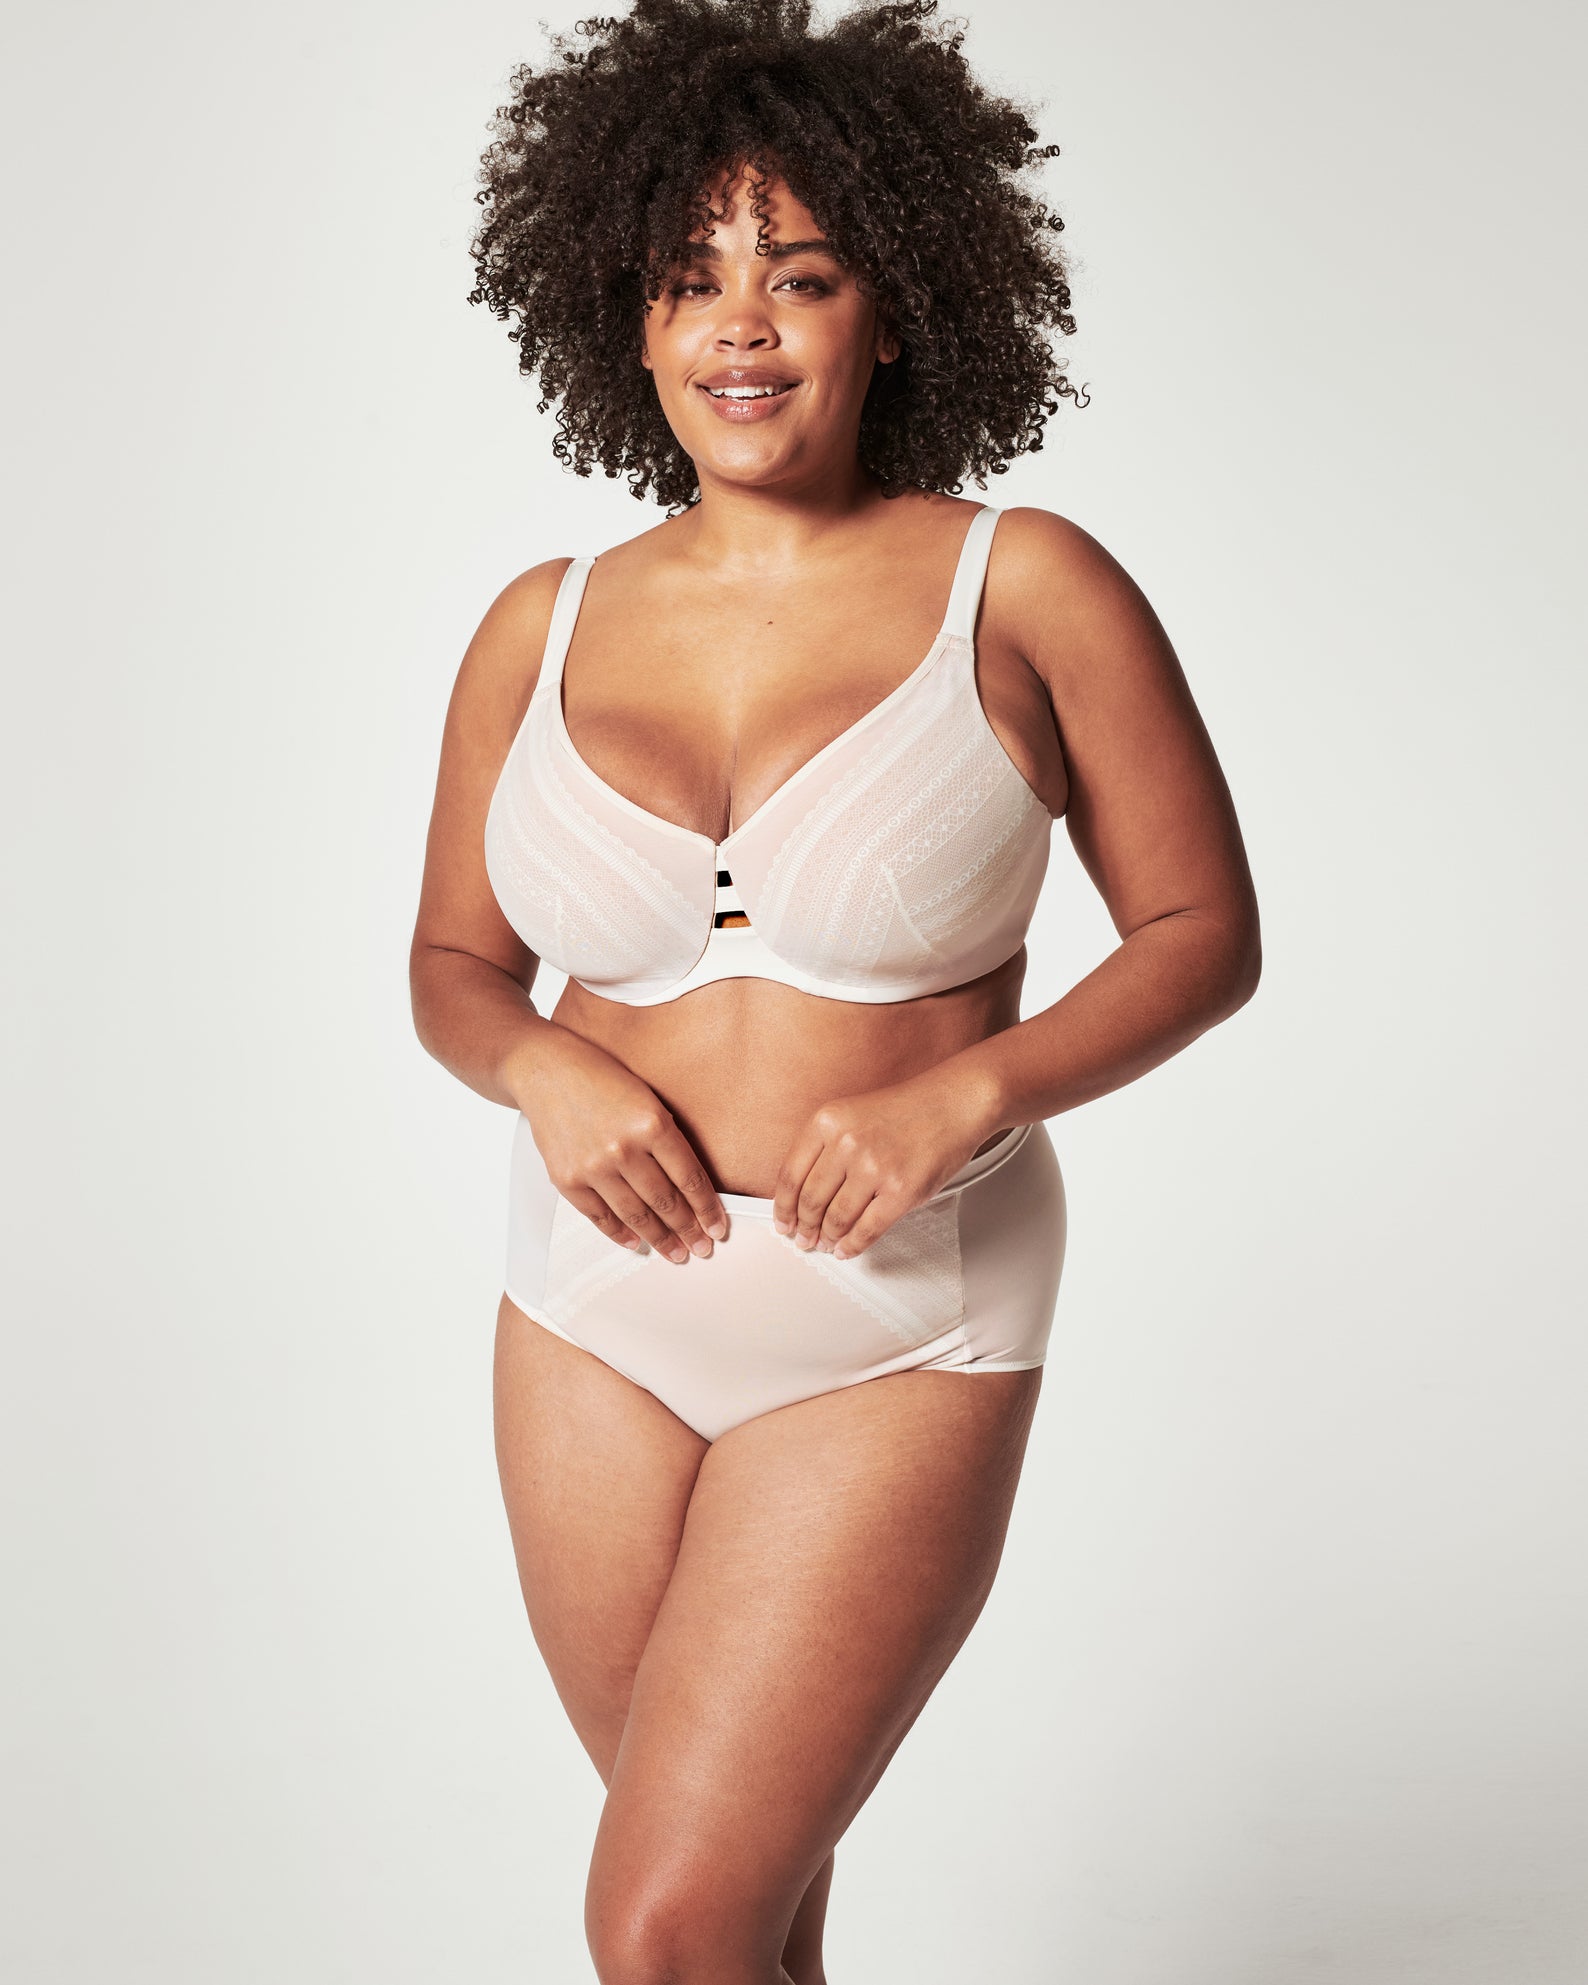 Shop The Collection Women's Shapewear up to 70% Off